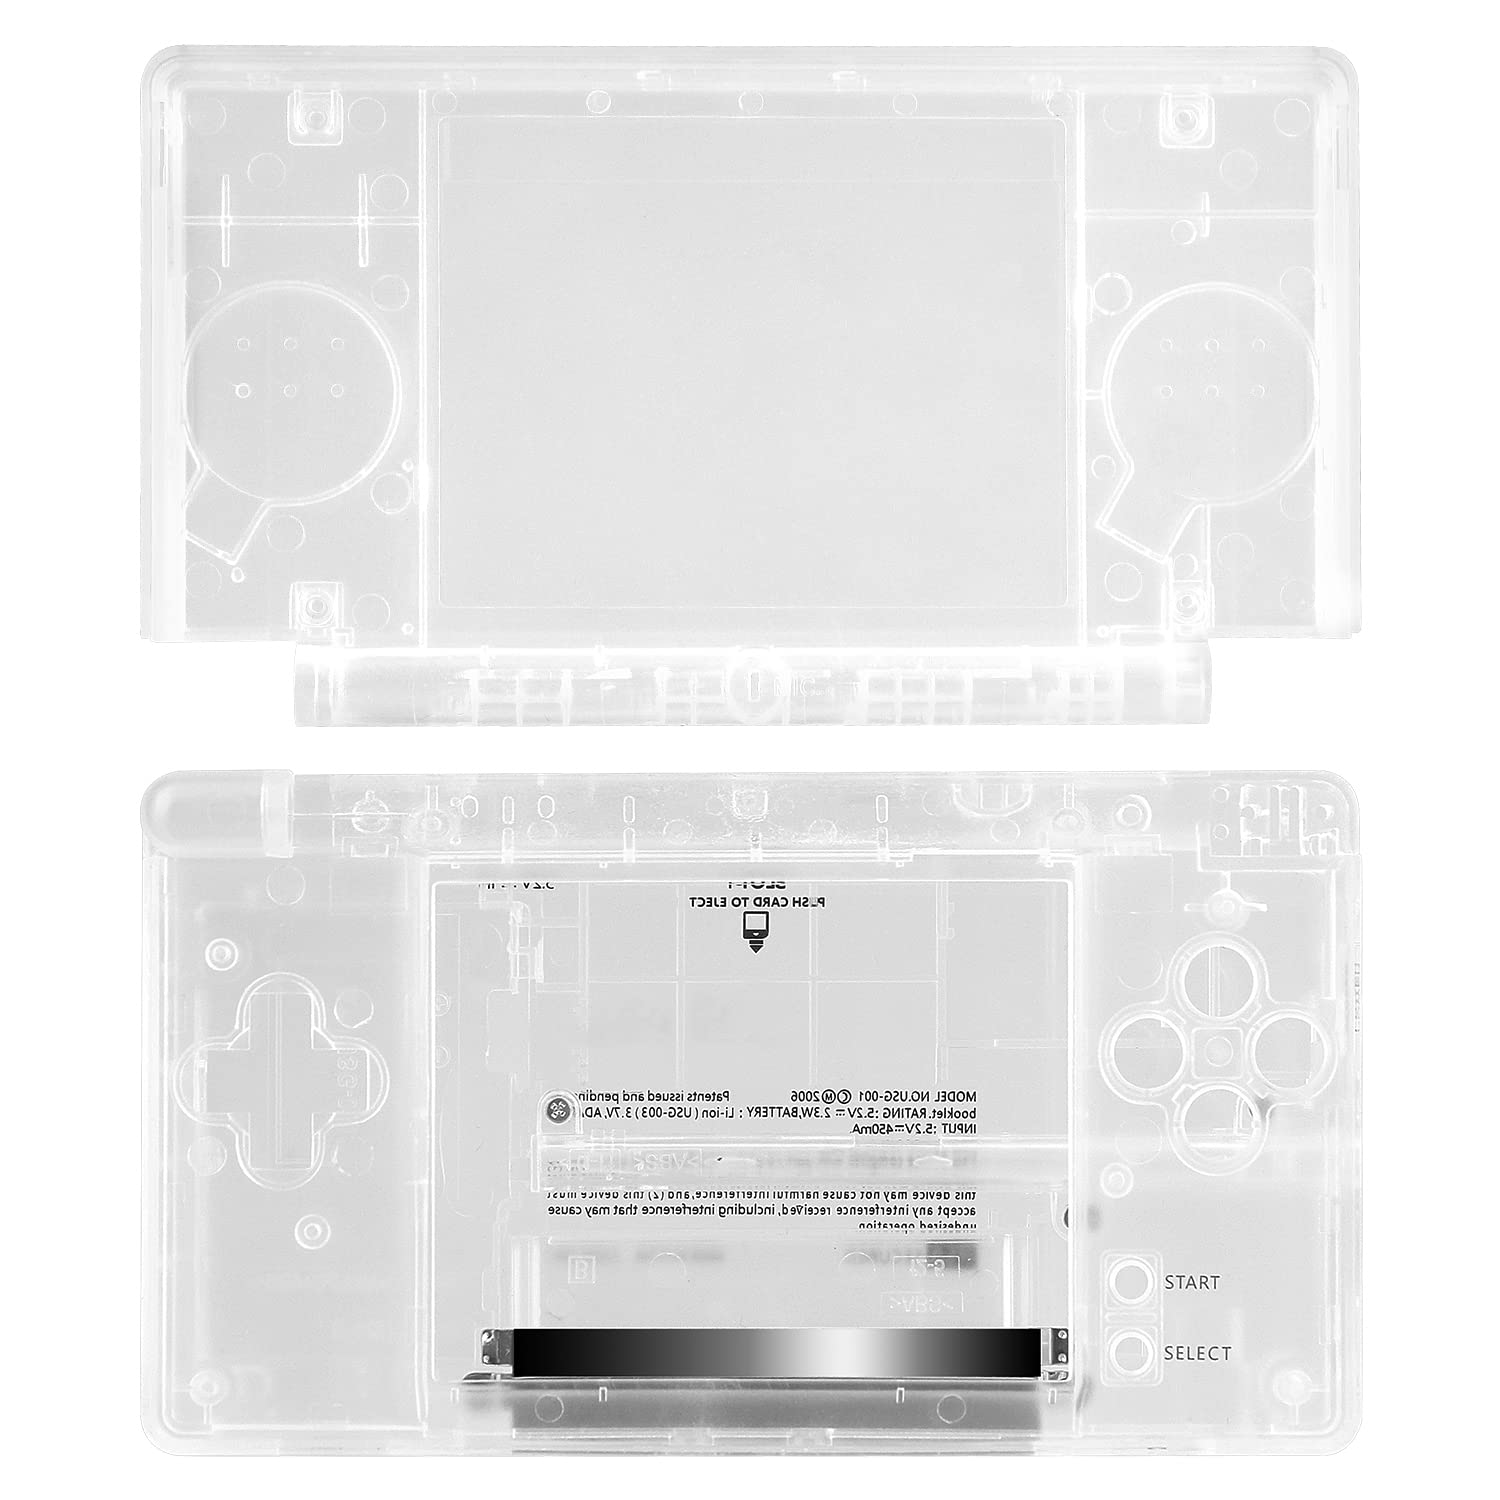 OSTENT Full Repair Parts Replacement Housing Shell Case Kit for Nintendo DS Lite NDSL Color Clear